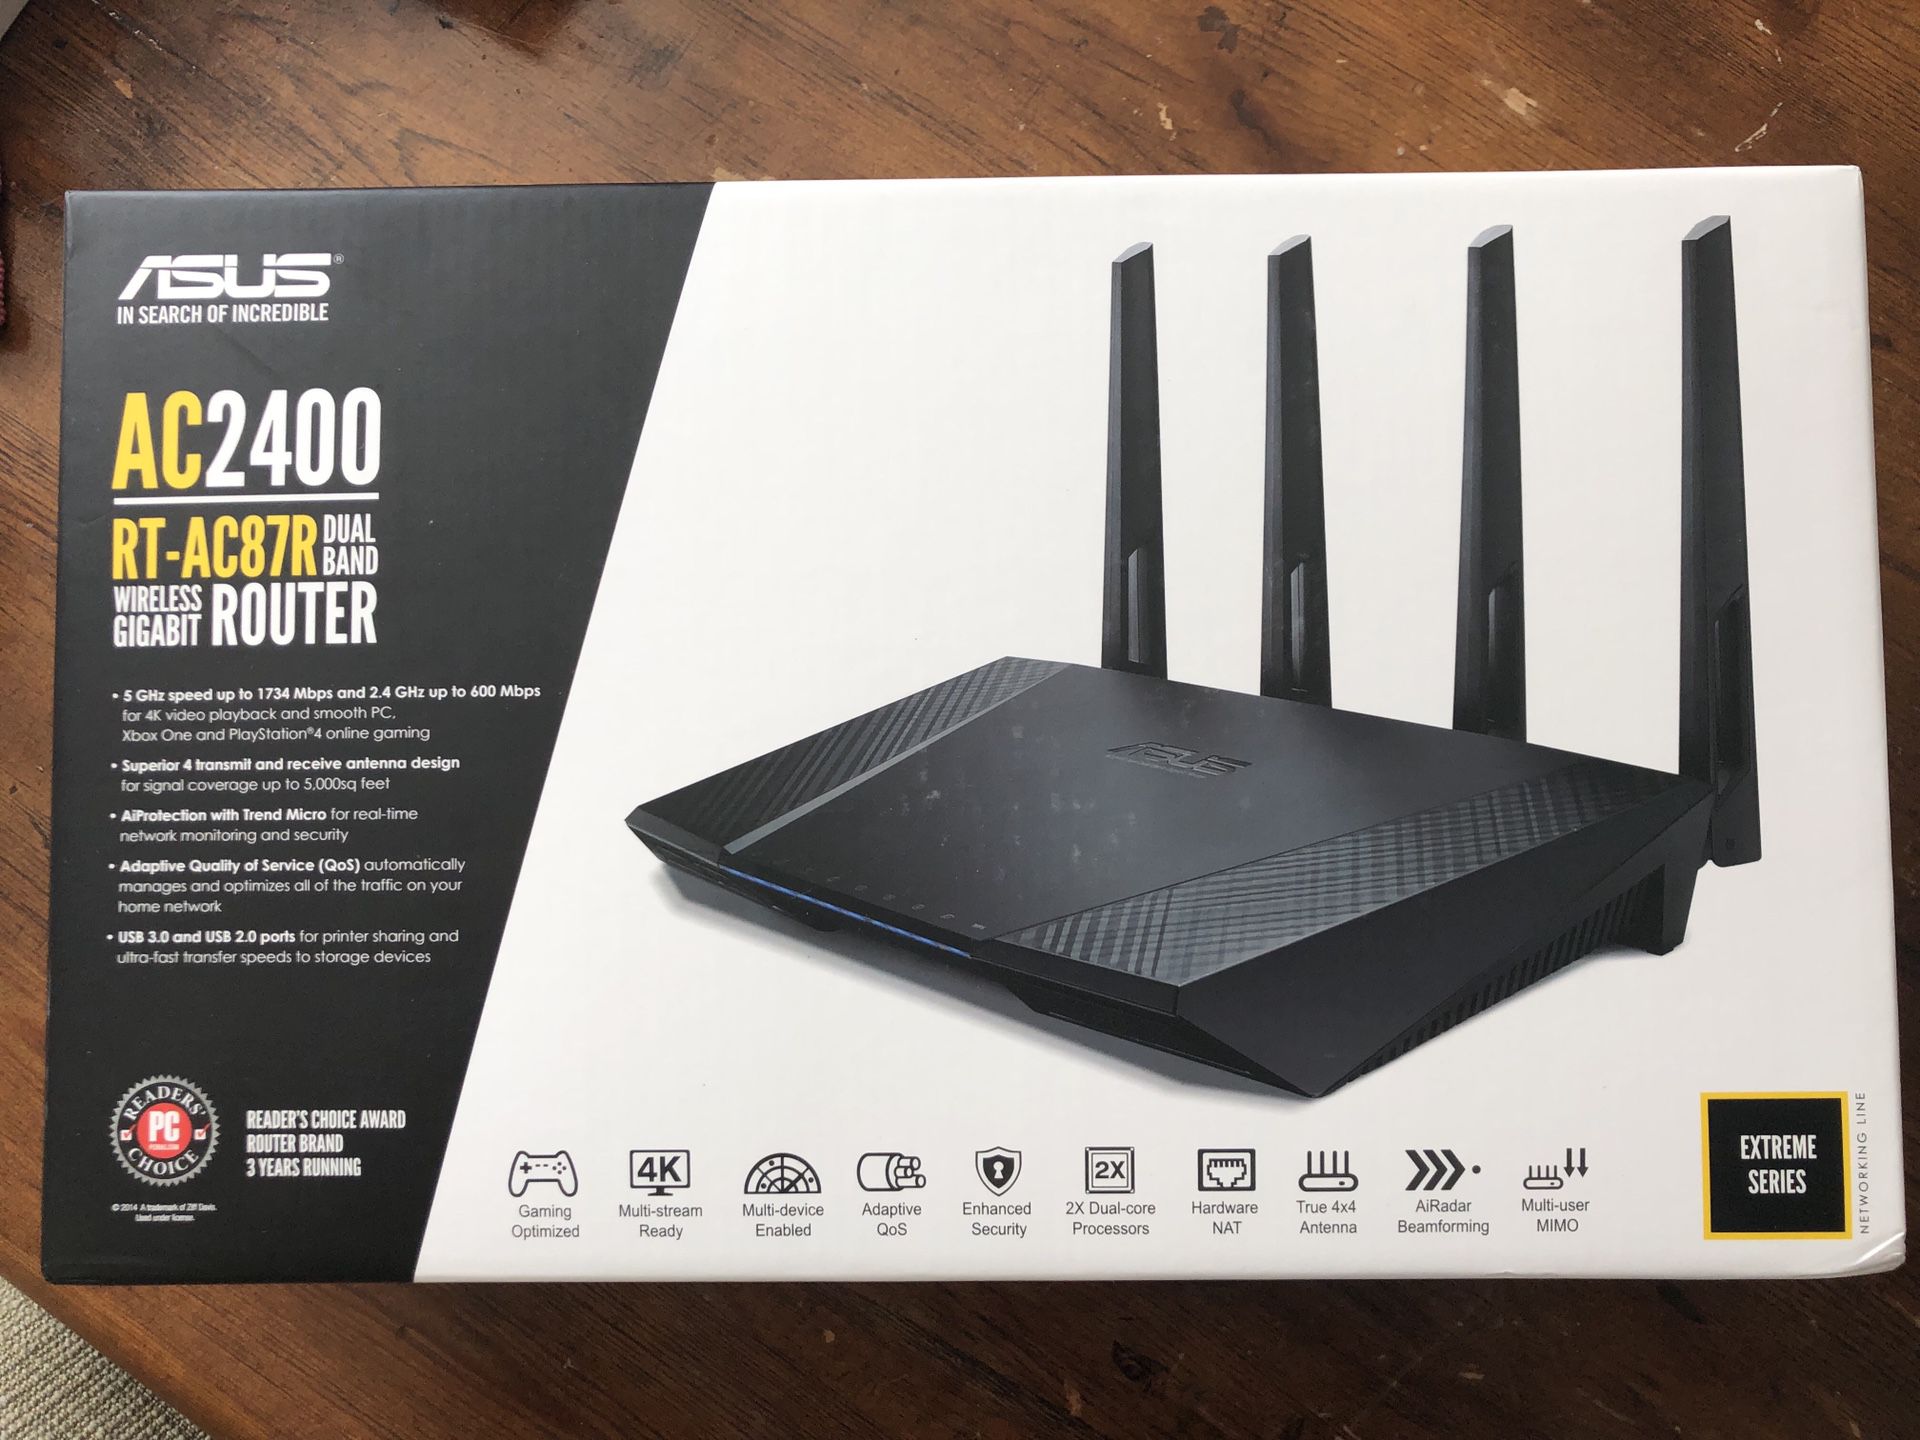 Asus AC2400 RT-AC87R Dual Band Wireless Gigabit Router